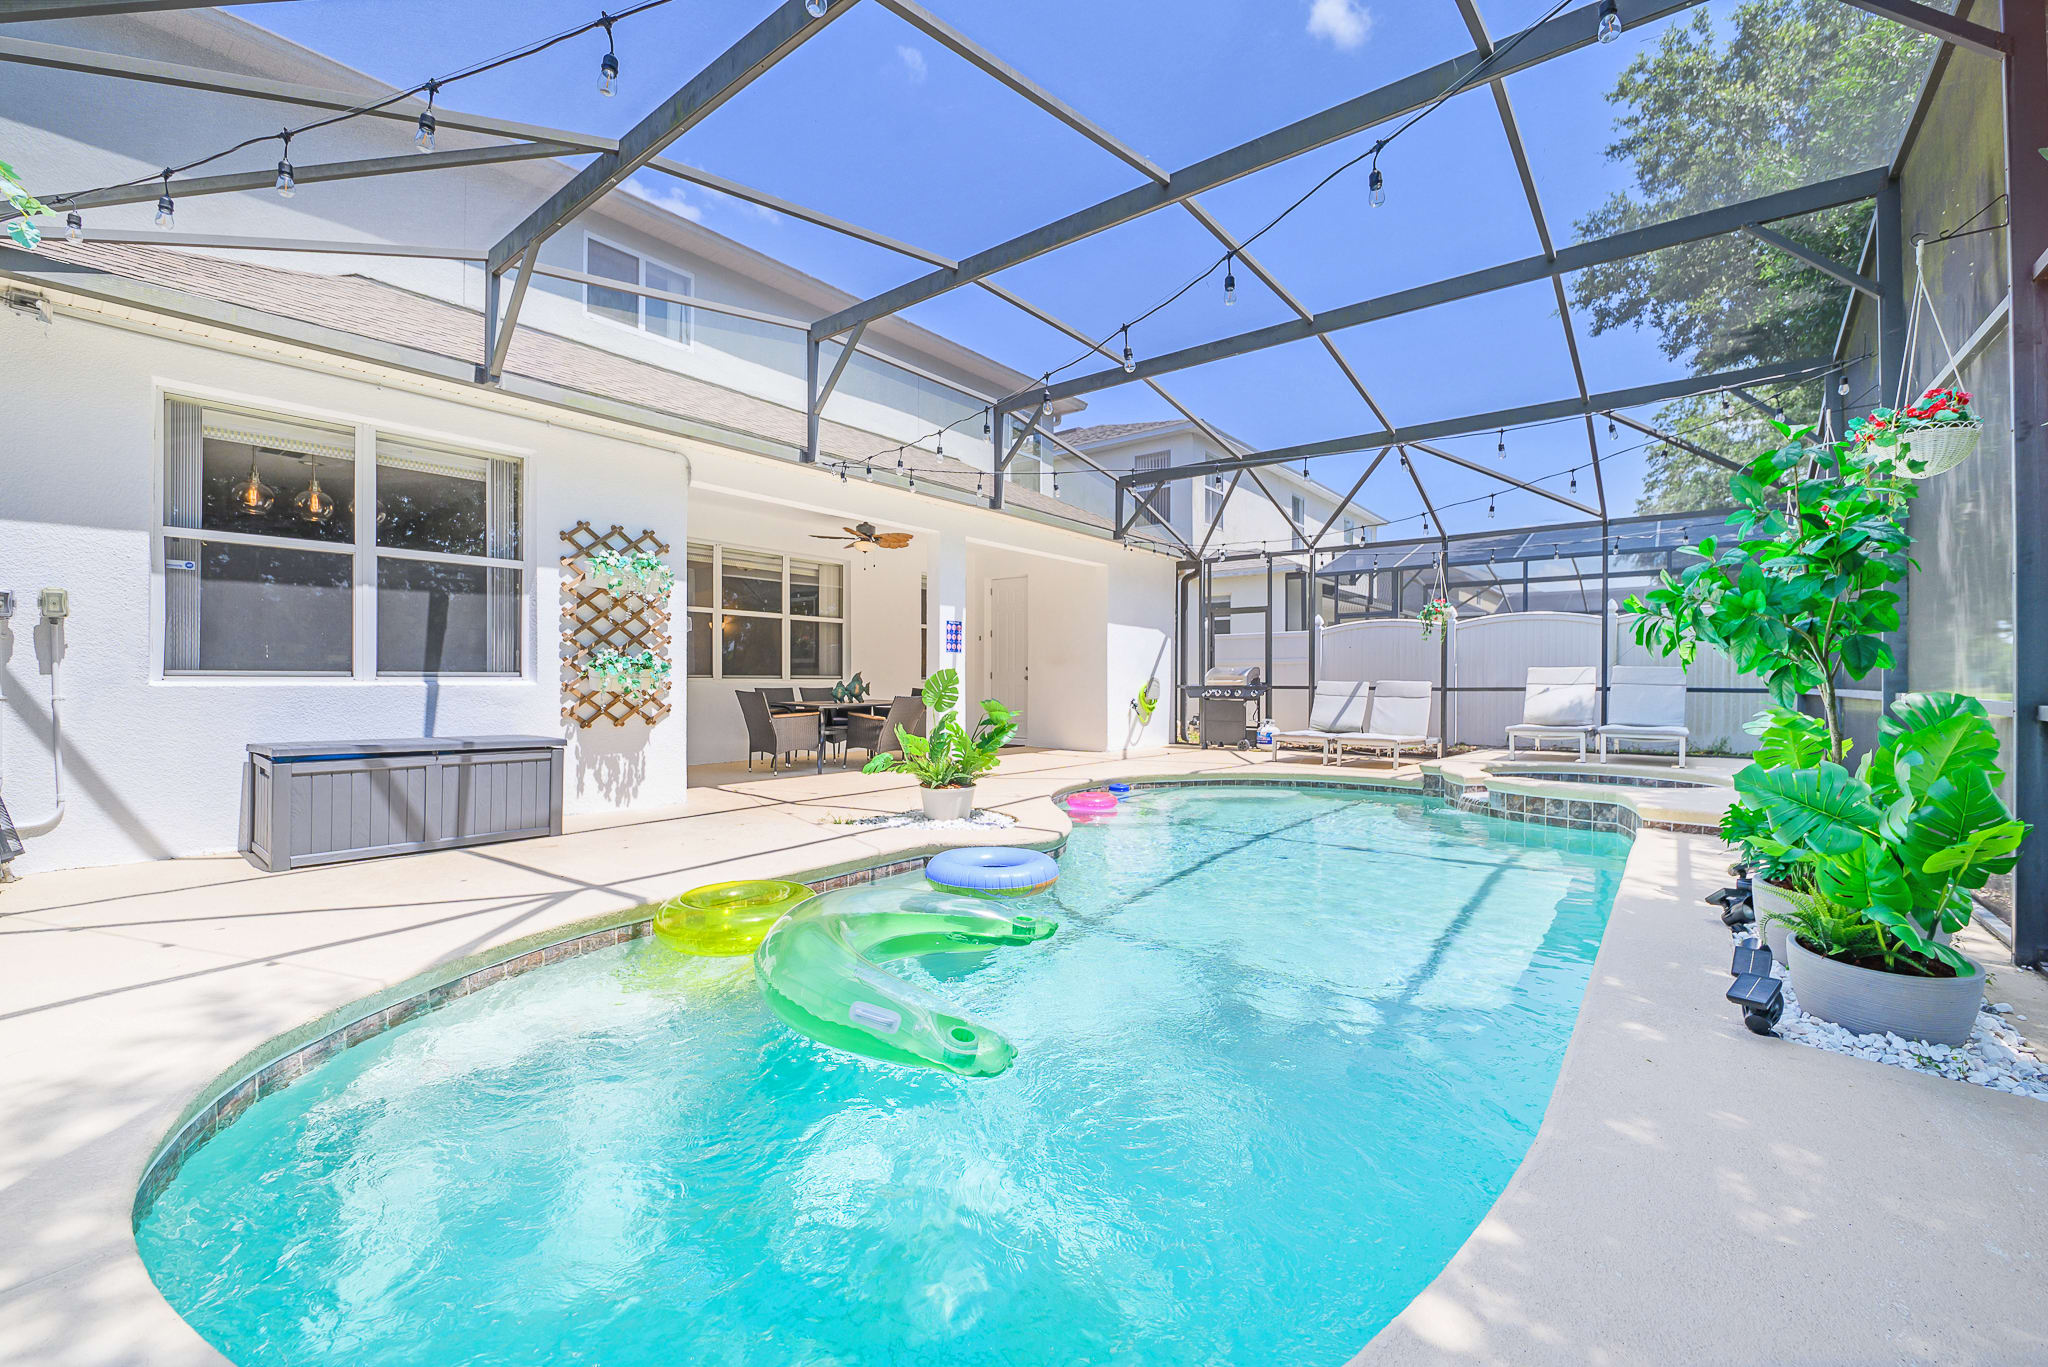 5BR Home Pool Hot Tub Games and Near Disney Photo